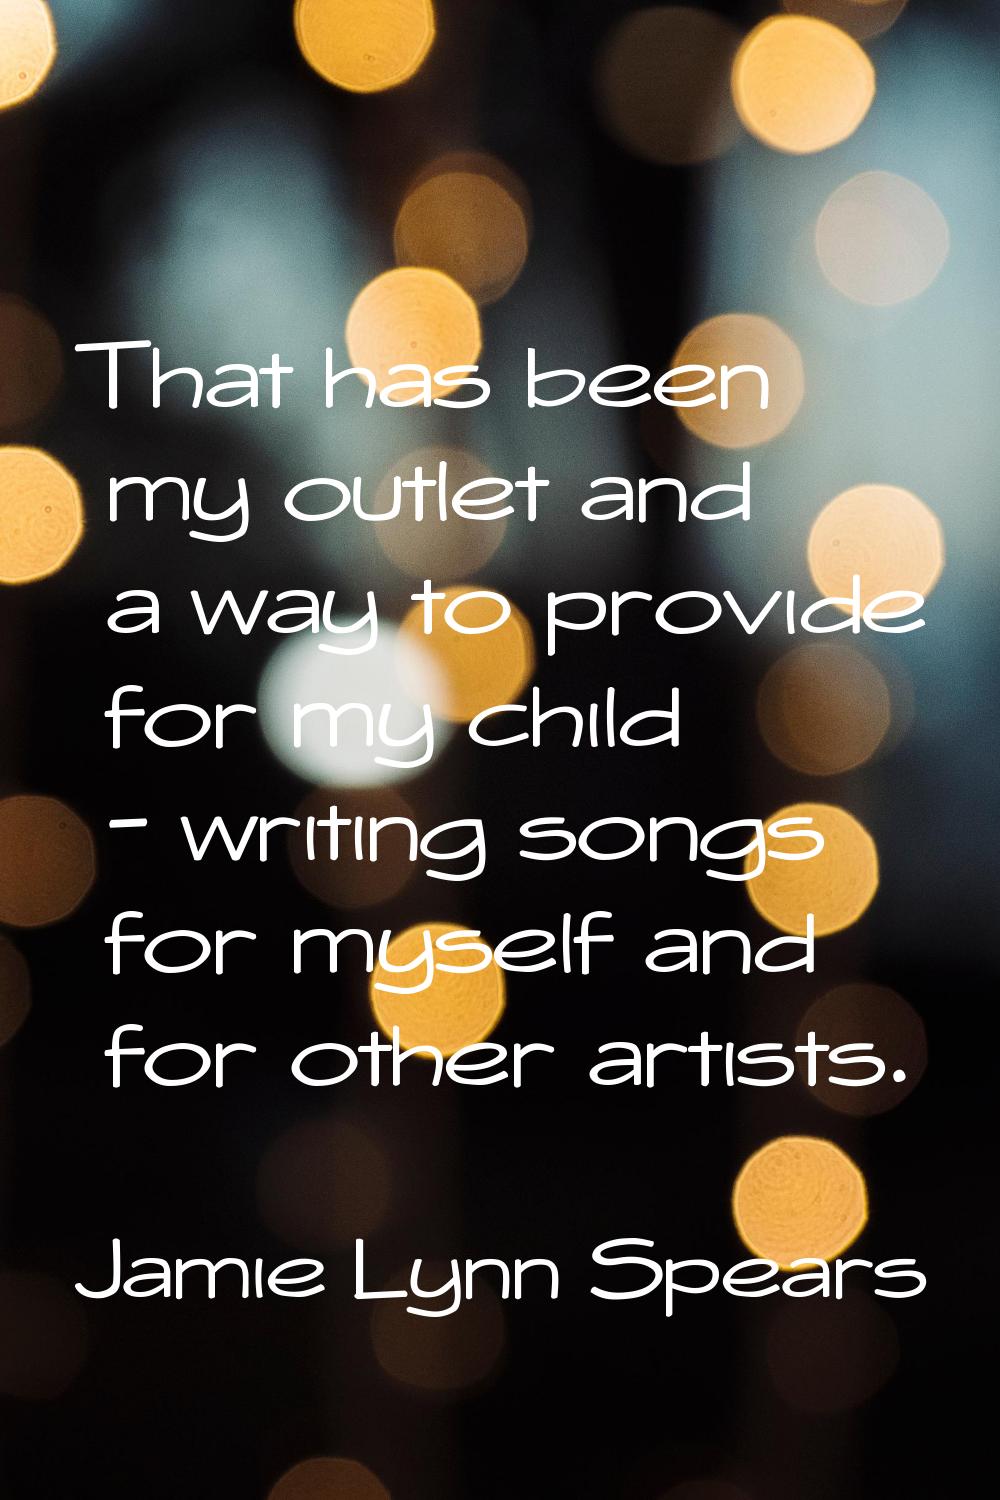 That has been my outlet and a way to provide for my child - writing songs for myself and for other 